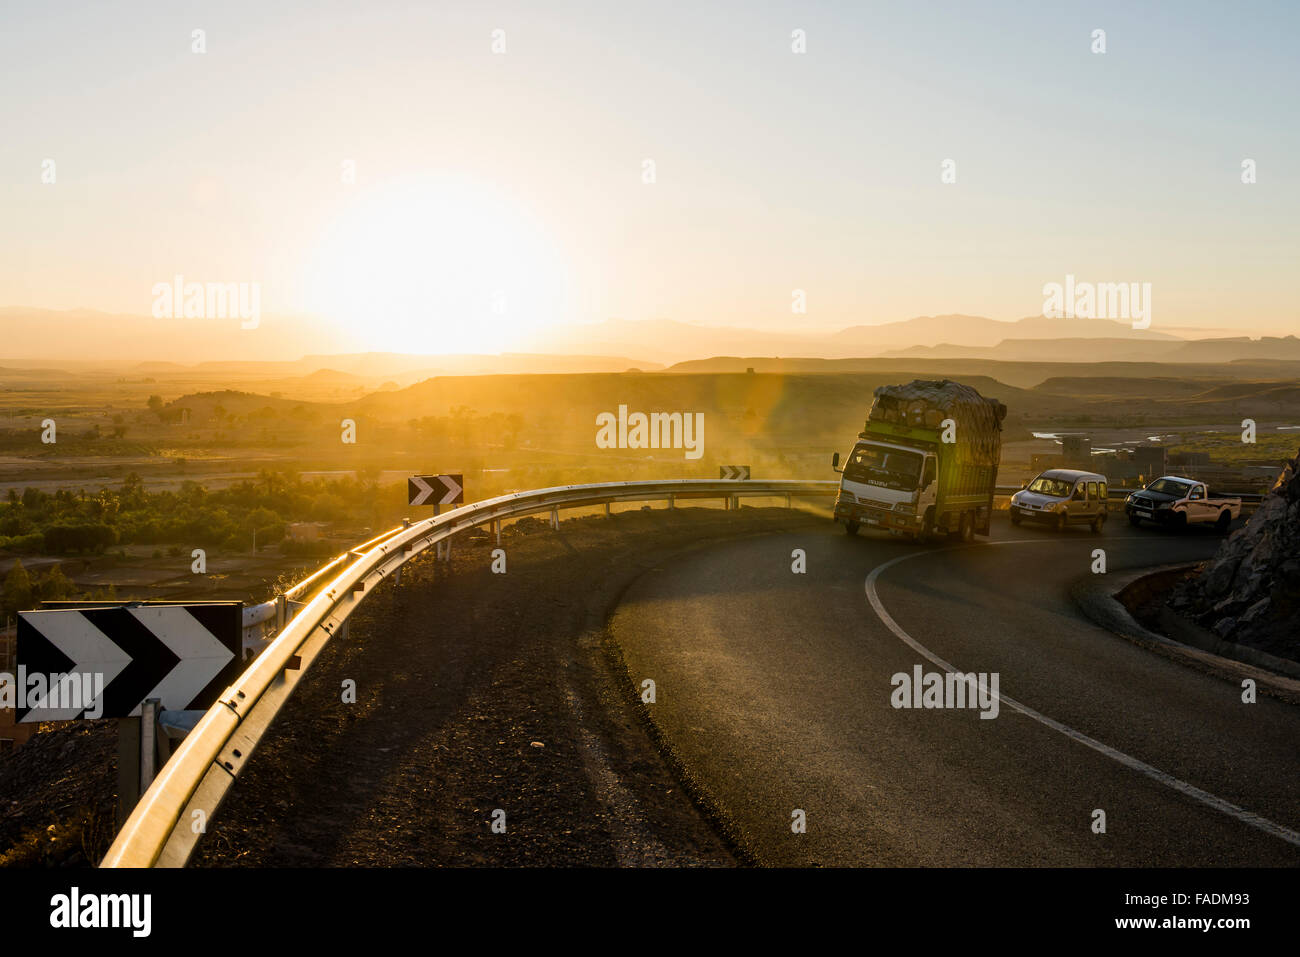 Loaded truck on curvy road in Dades Valley at sunset, Ouarzazate, Morocco Stock Photo